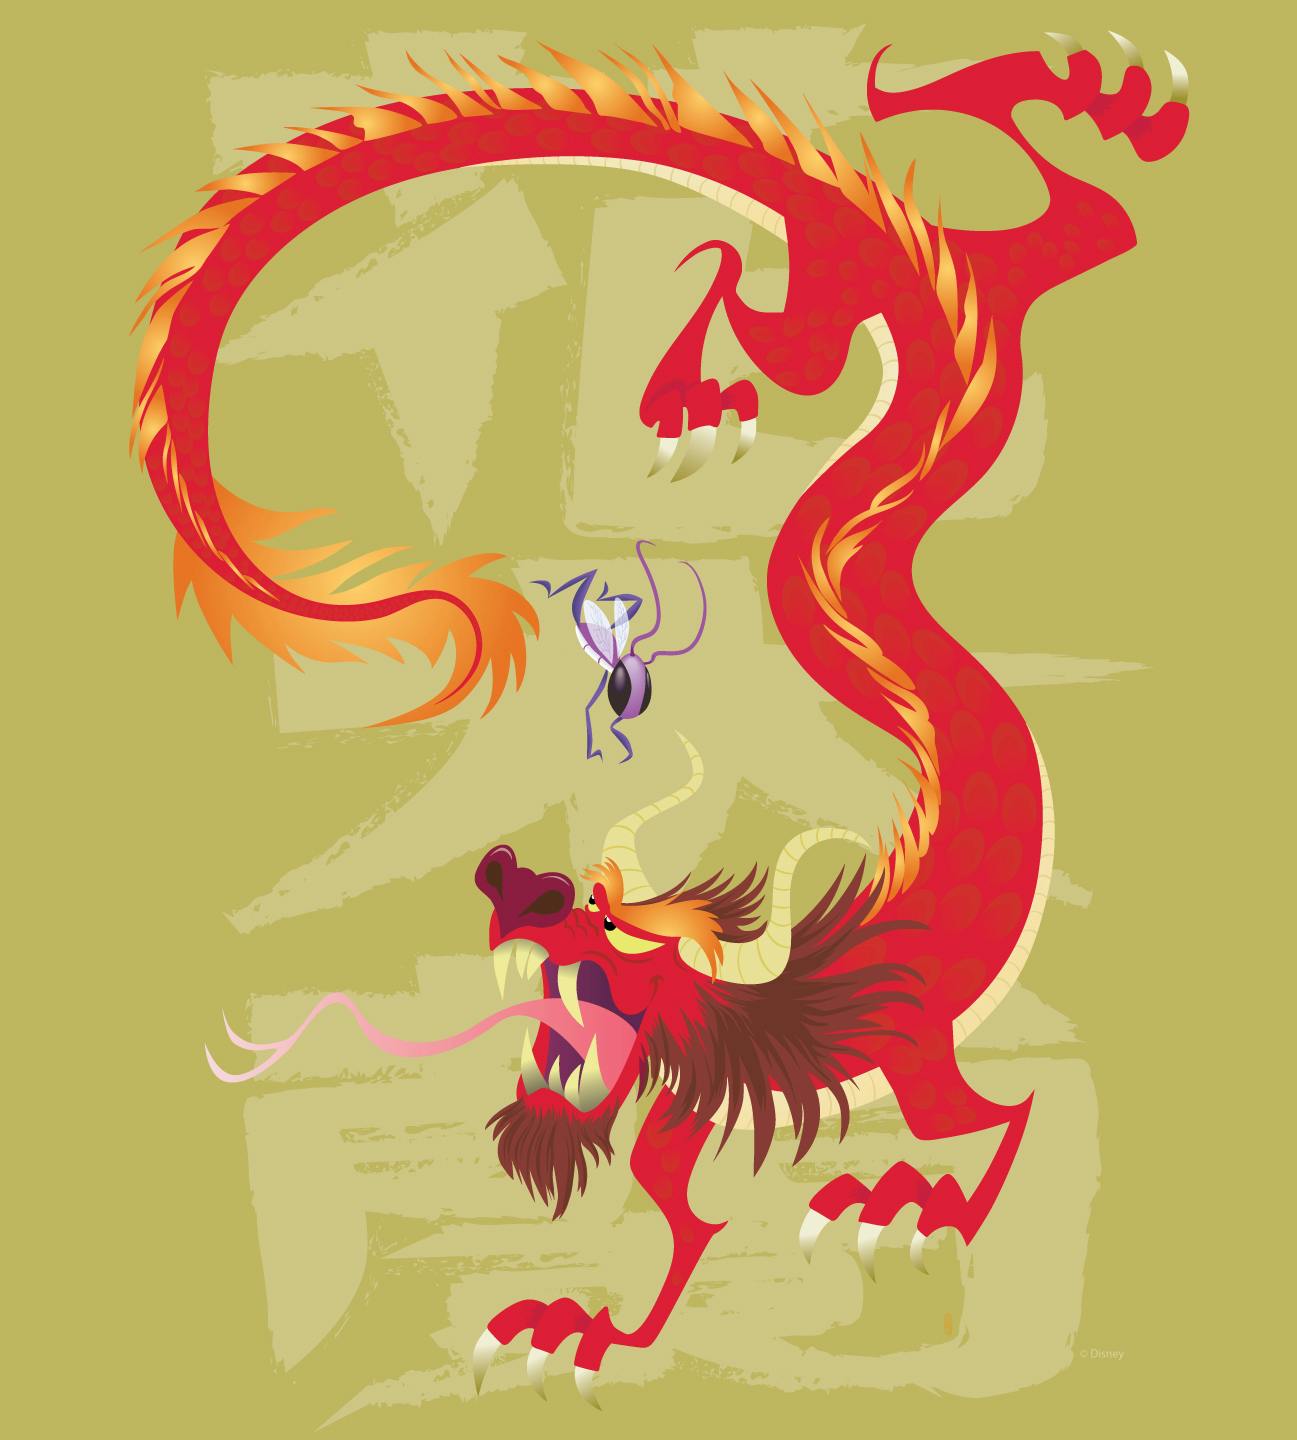 An illustration of a Chinese dragon